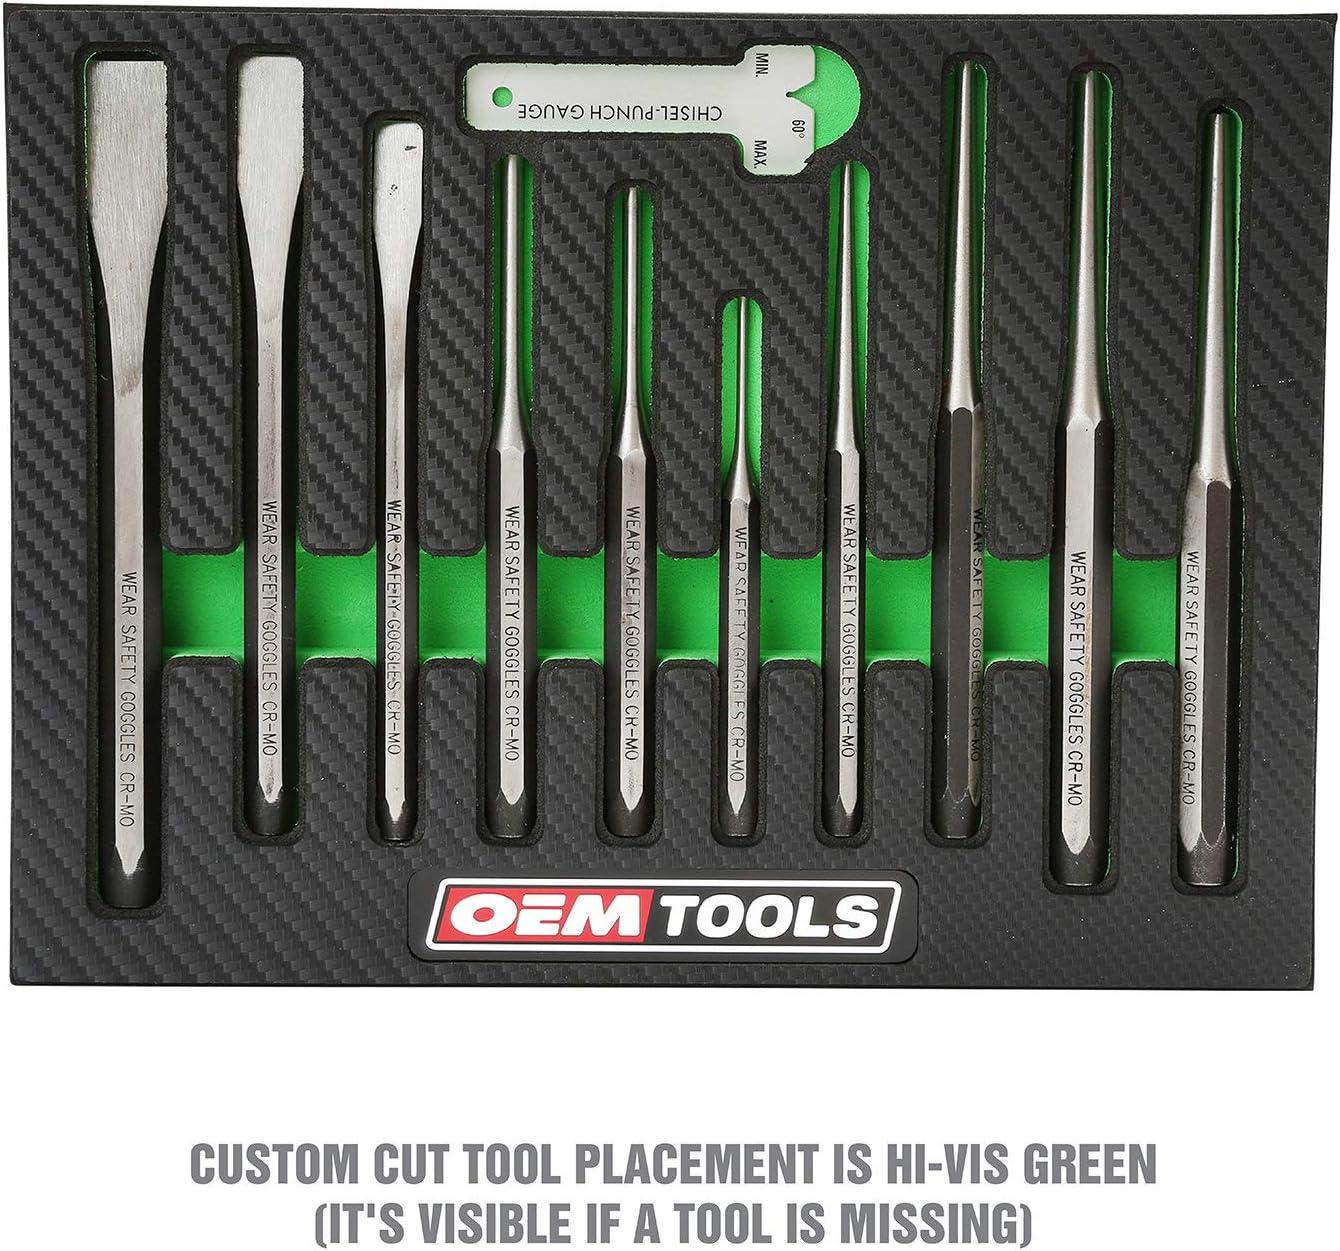 OEMTOOLS 23996 Punch and Chisel Set, 11 Piece, Cut, Shape, and Puncture  Medium and Soft Metals, Heat-Treated Alloy Steel, Includes Green EVA  Organizer Tray